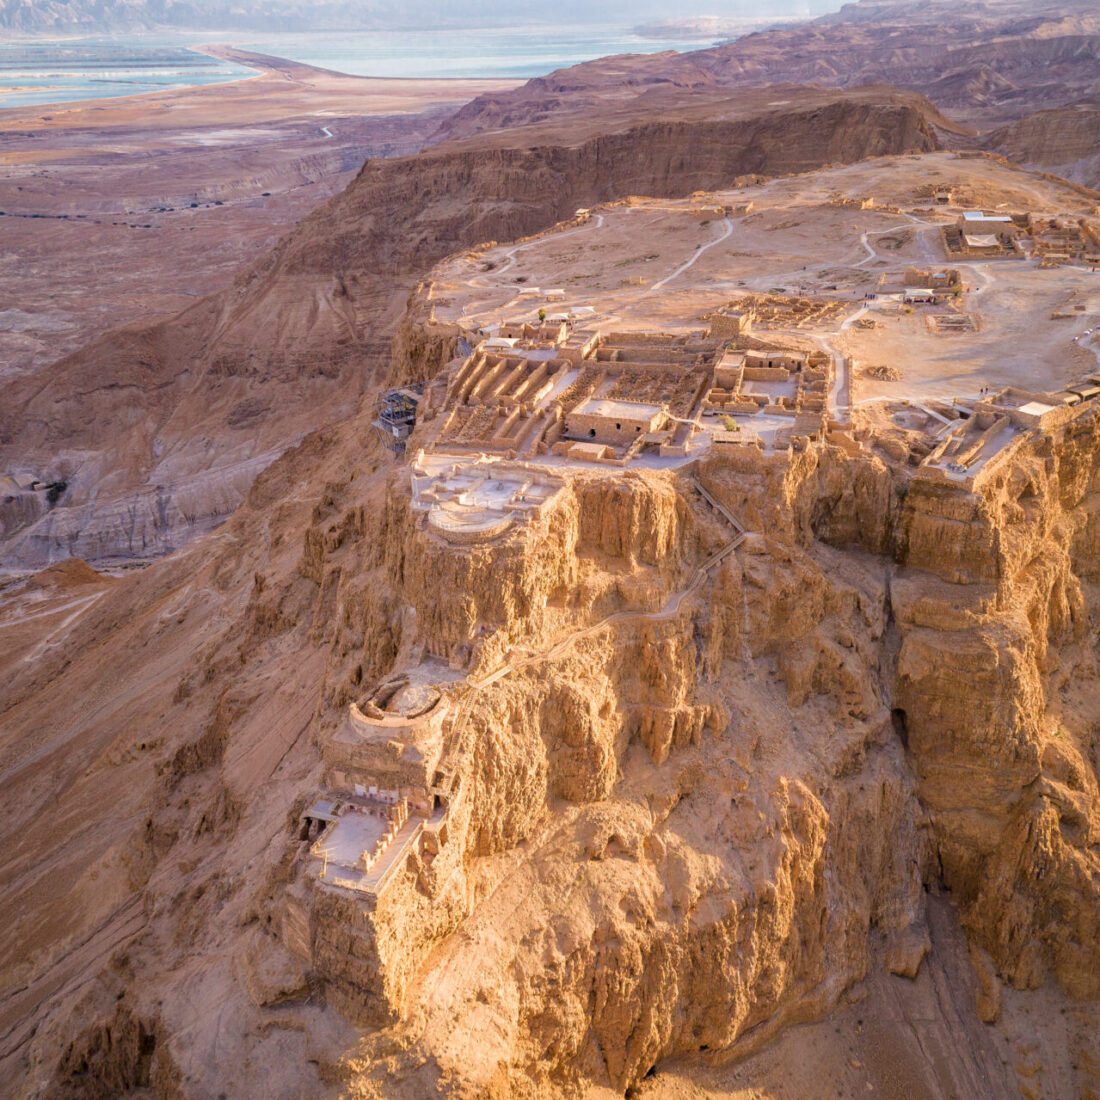 Masada, one of King Herod’s ambitious building projects. Photo by Shutterstock.